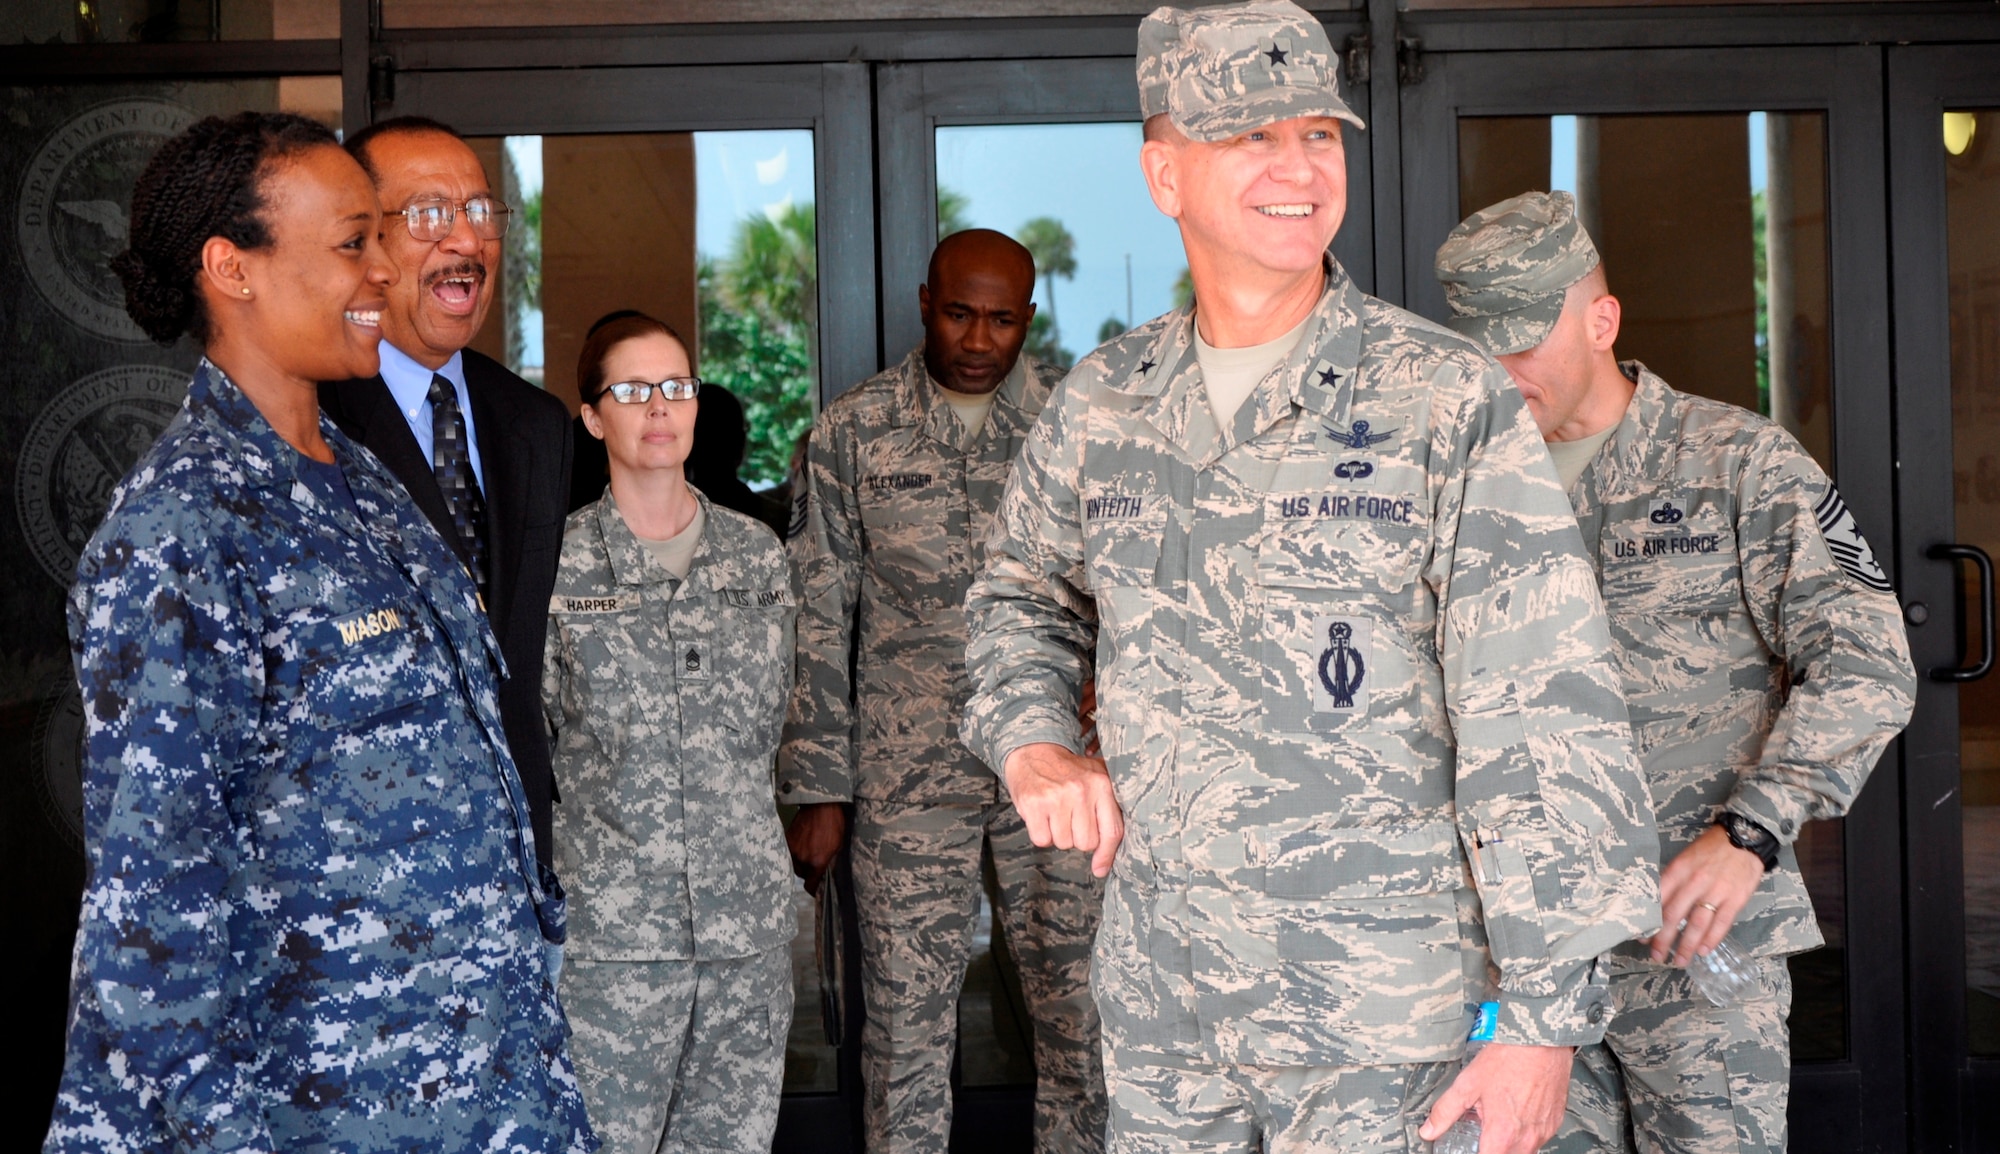 Brig. Gen. Wayne R. Monteith, 45th Space Wing commander, right, is all smiles as he departs the Defense Equal Opportunity Management Institute, Oct. 21, 2015. Wishing him well are (left to right), Navy Commander Yolanda K. Mason, DEOMI Chief of Staff / Acting Commandant, Dr. Jose Bolton, Sr., DEOMI Dean, Sgt. 1st Class Jennifer Harper, DEOMI Public Affairs NCOIC, Chief Master Sgt. Boston Alexander, DEOMI Senior Enlisted Advisor, and Chief Master Sgt. Jason A. Lamoureux, 45th Space Wing command chief, (partially hidden behind Monteith. (U.S. Air Force photo/Christopher Calkins) 